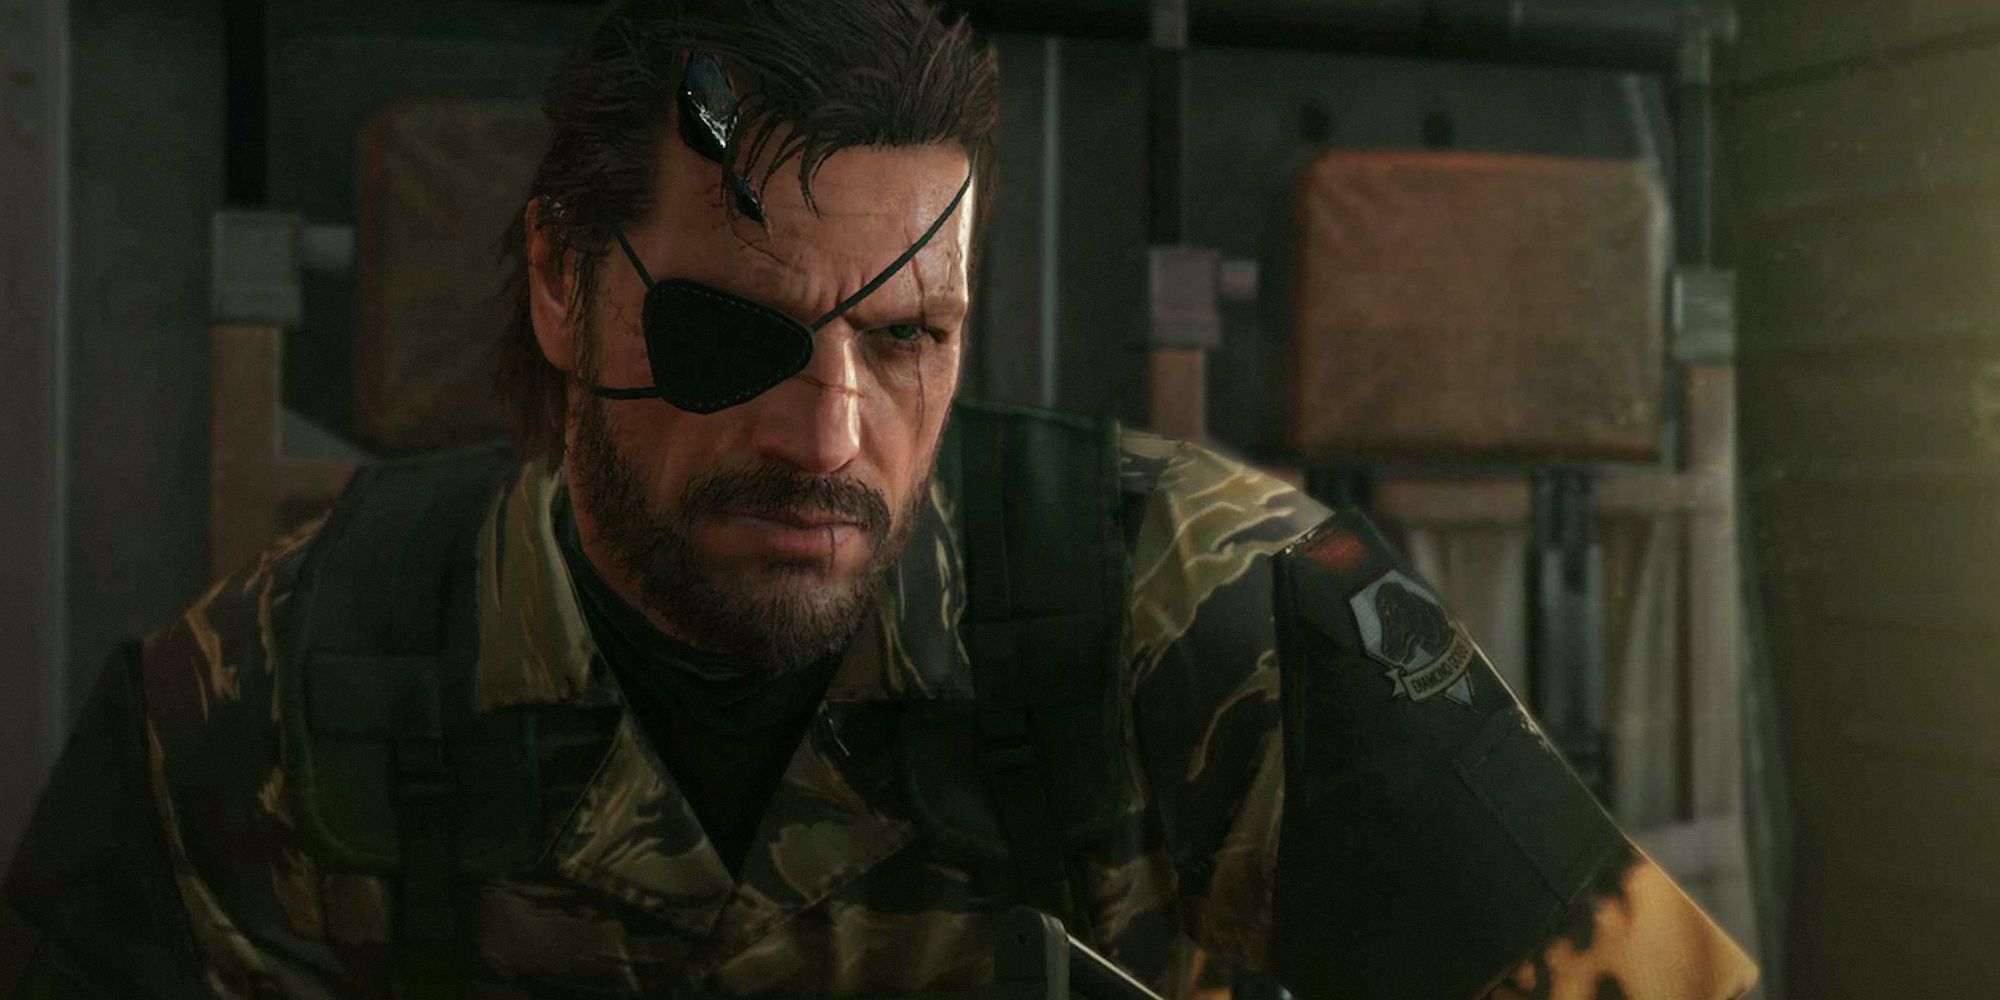 Metal Gear Solid 5. Solid Snake sitting in a helicopter.